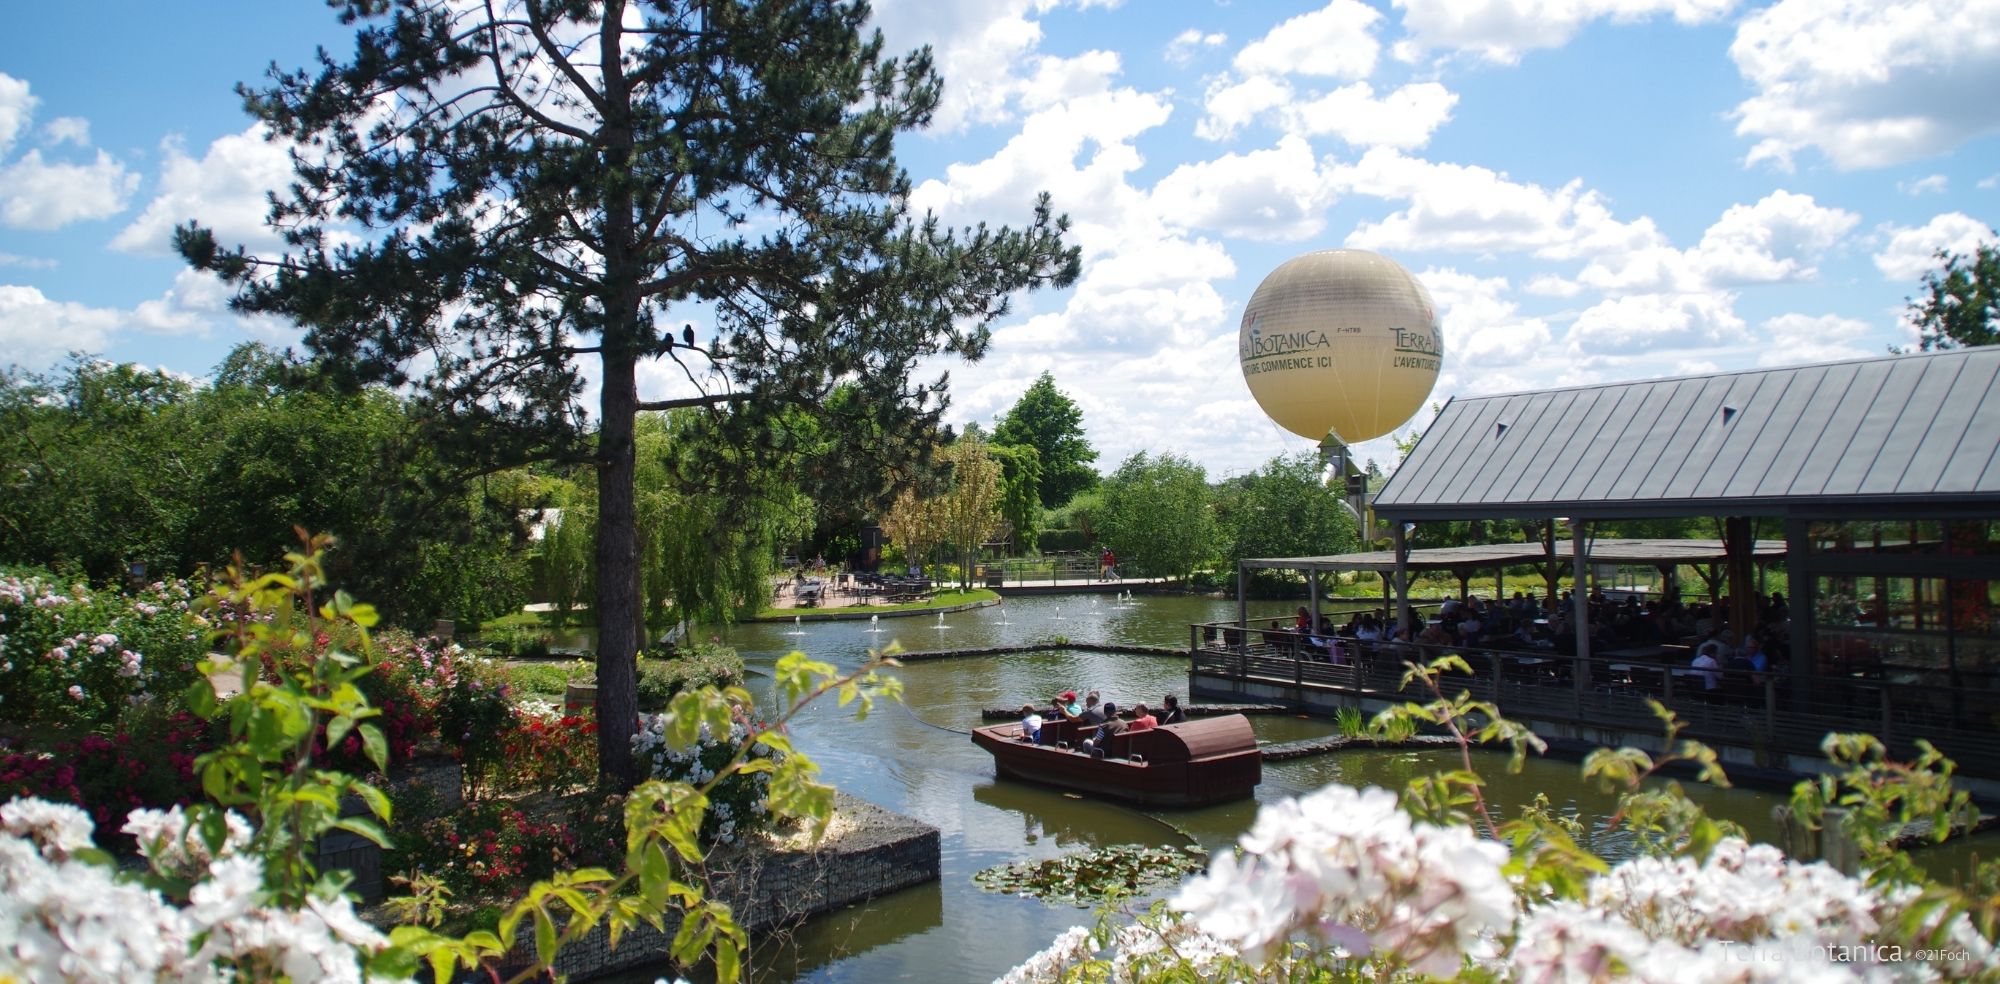 Take advantage of your stay in Angers to visit Terra Botanica, the garden park<br/><a href='https://www.terrabotanica.fr/en/' title='Terra Botanica' target='_blank'>DISCOVER BOTANICAL ADVENTURE</a>